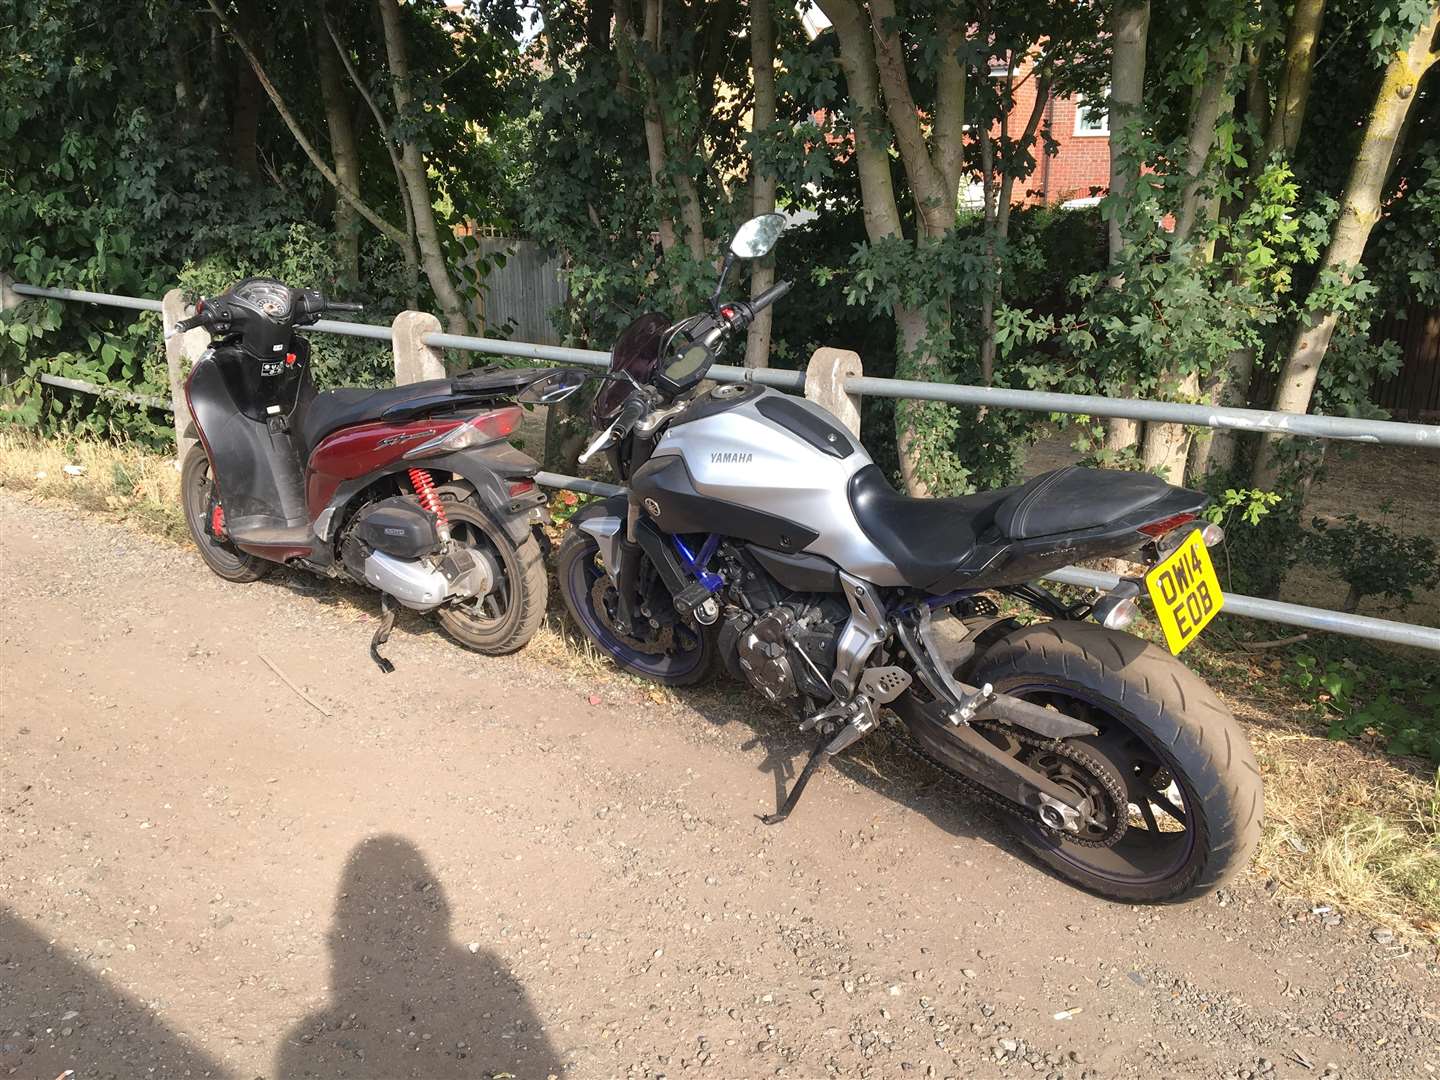 Two of the motorbikes seized by police